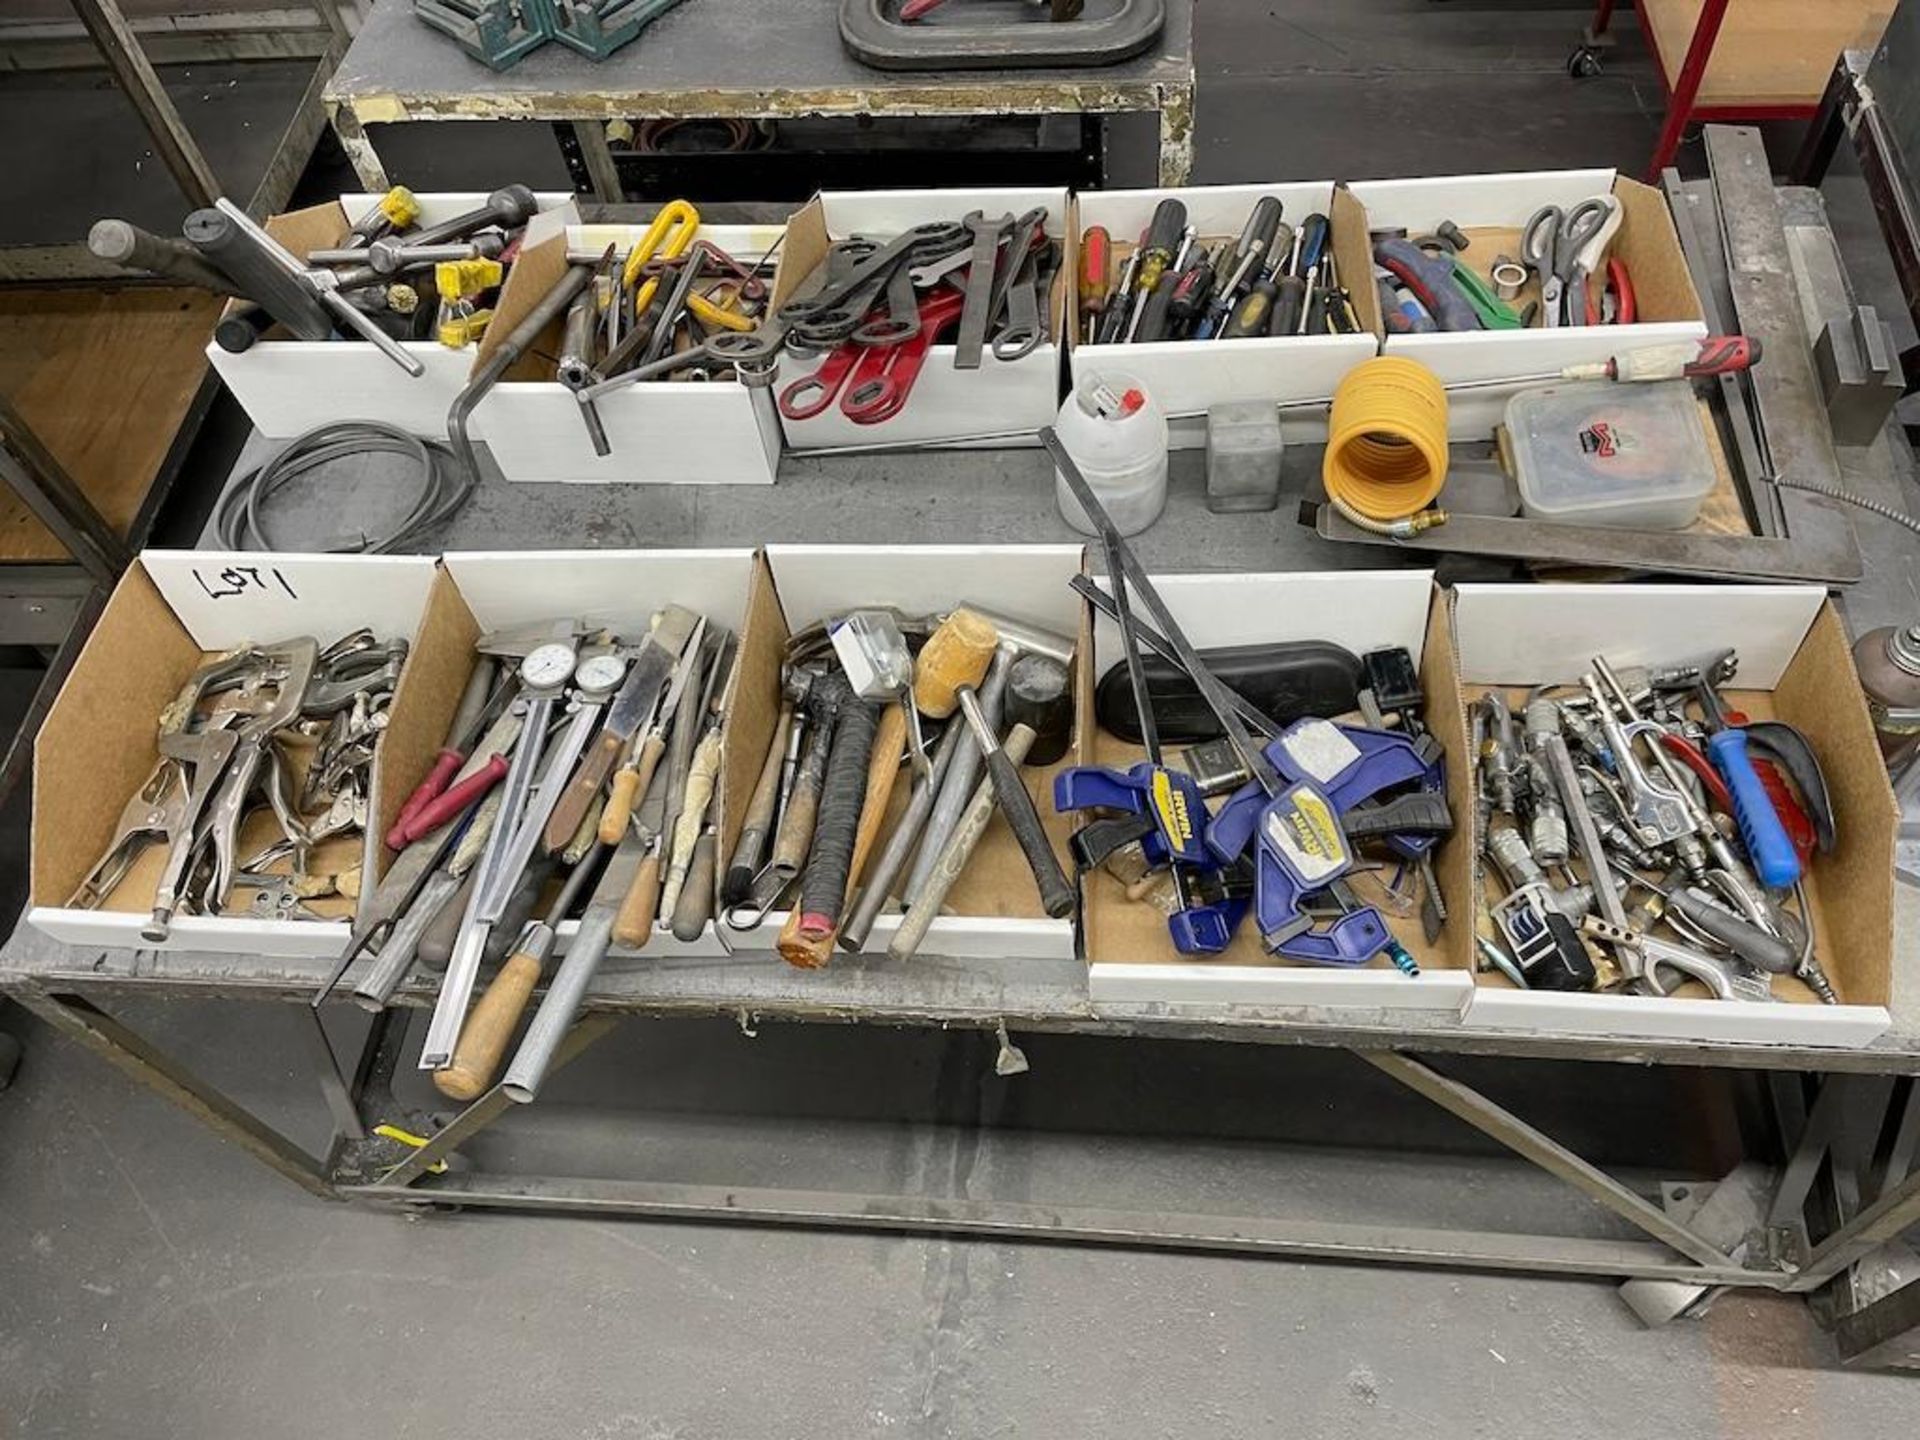 ASSORTED HAND TOOLS, PNEUMATIC, GLOVES, TAPE DISPENSERS, HEIGHT GAUGE, PLUNGER CANS, W 3 HD STEEL